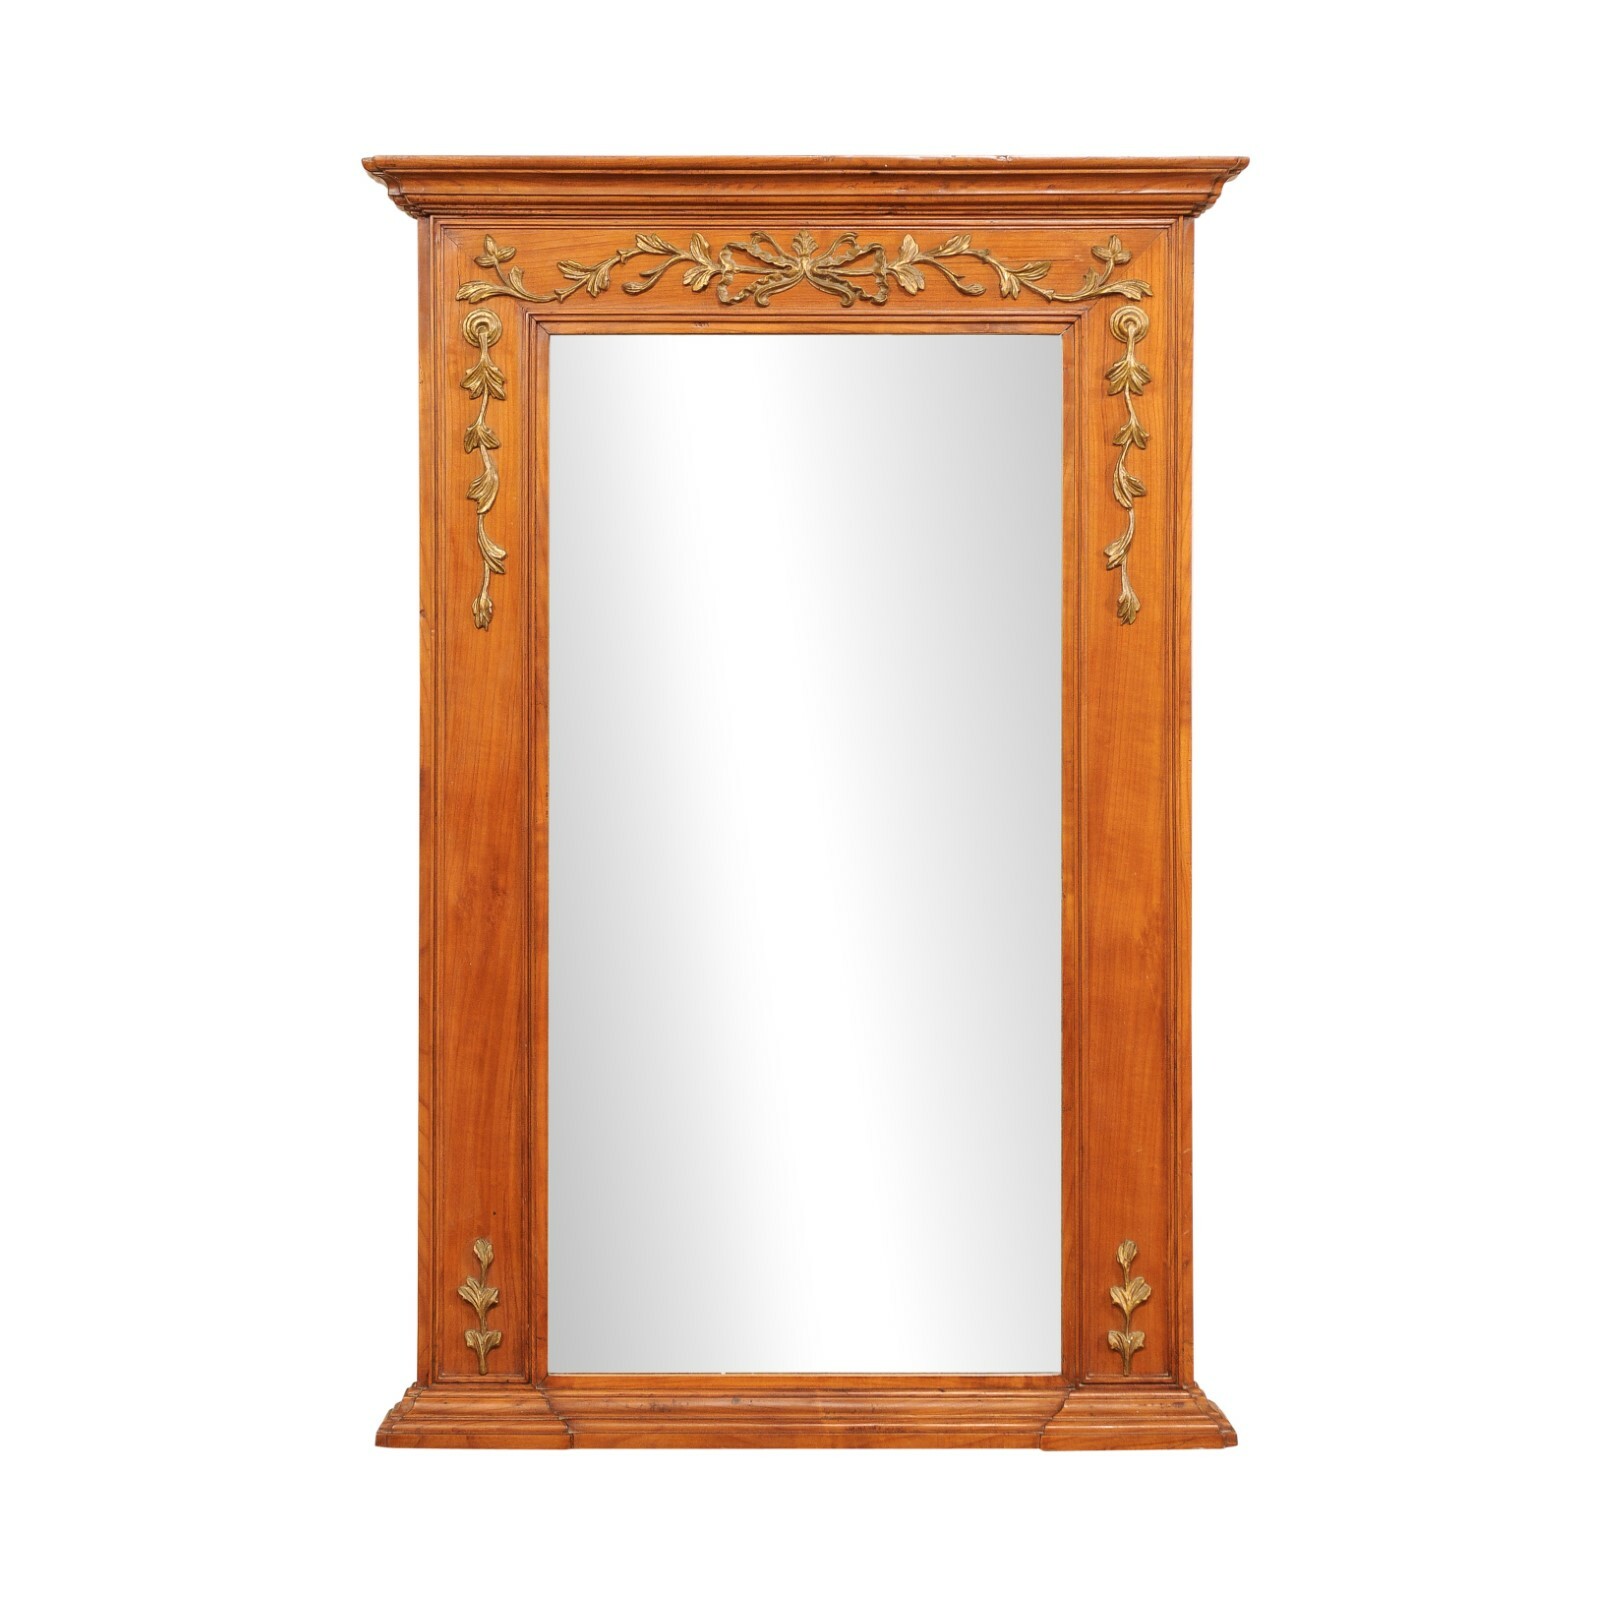 French Antique 4ft Mirror w/Foliate Accents